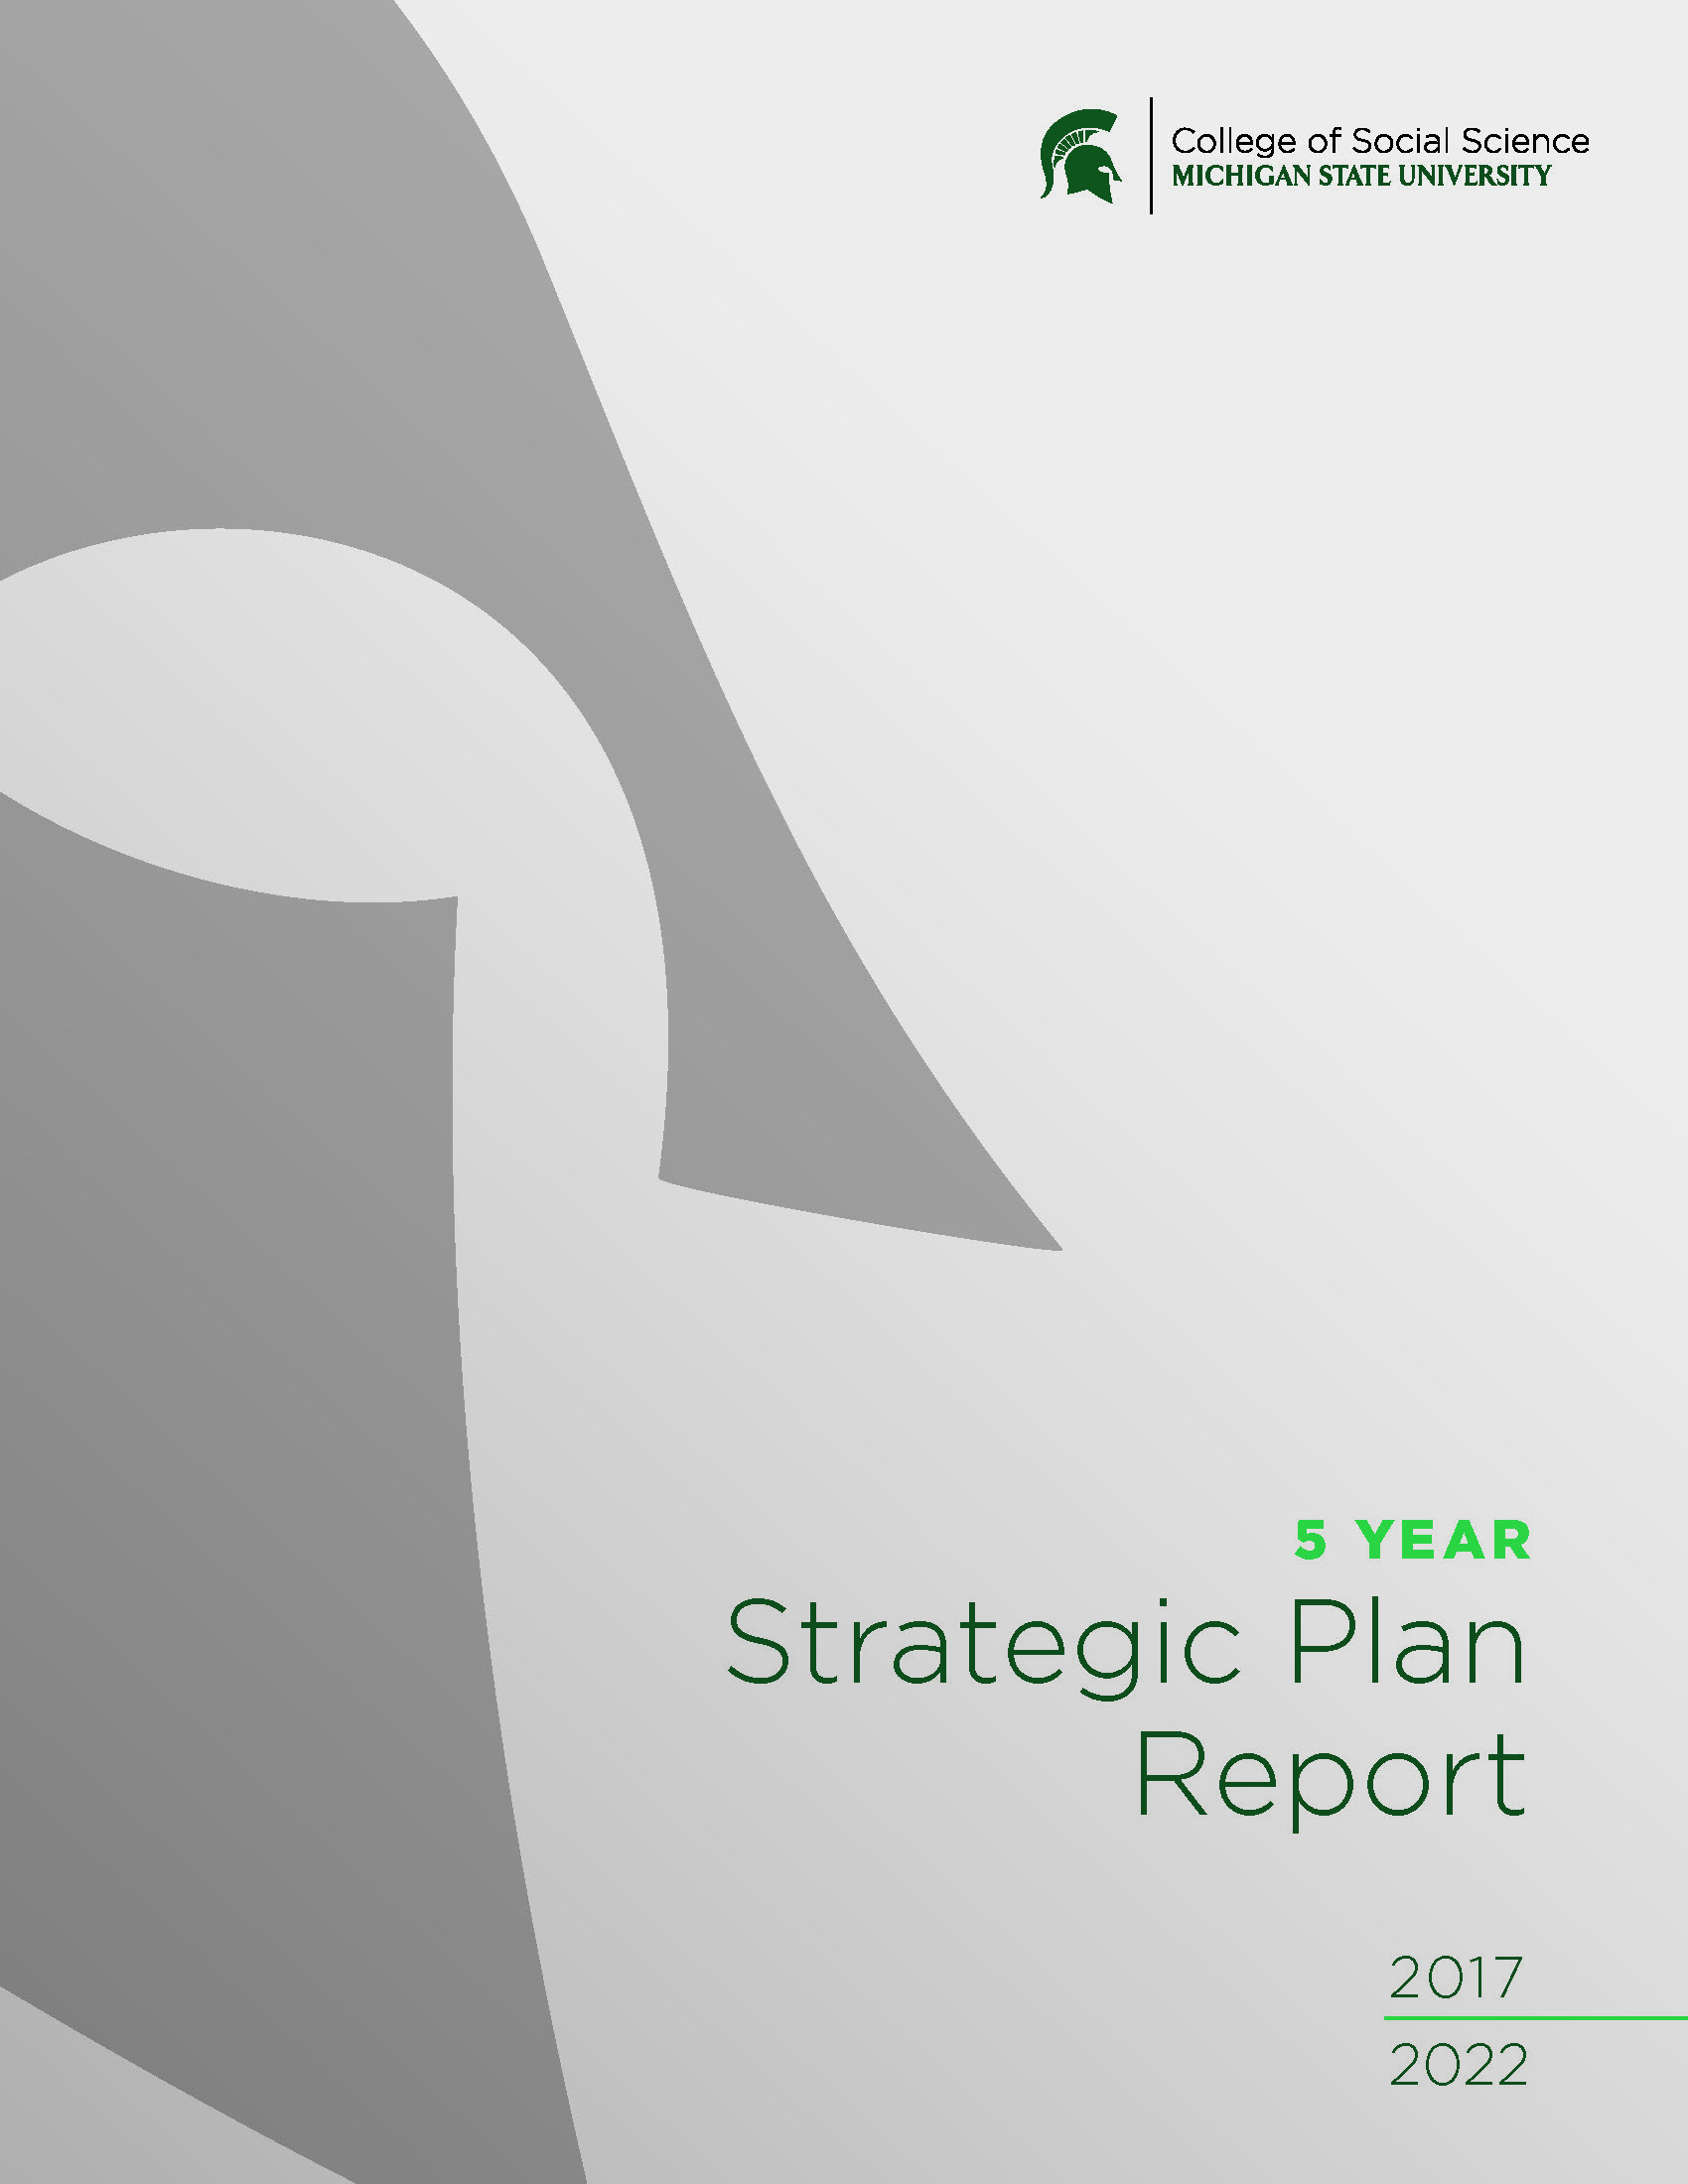 Strat Plan results cover